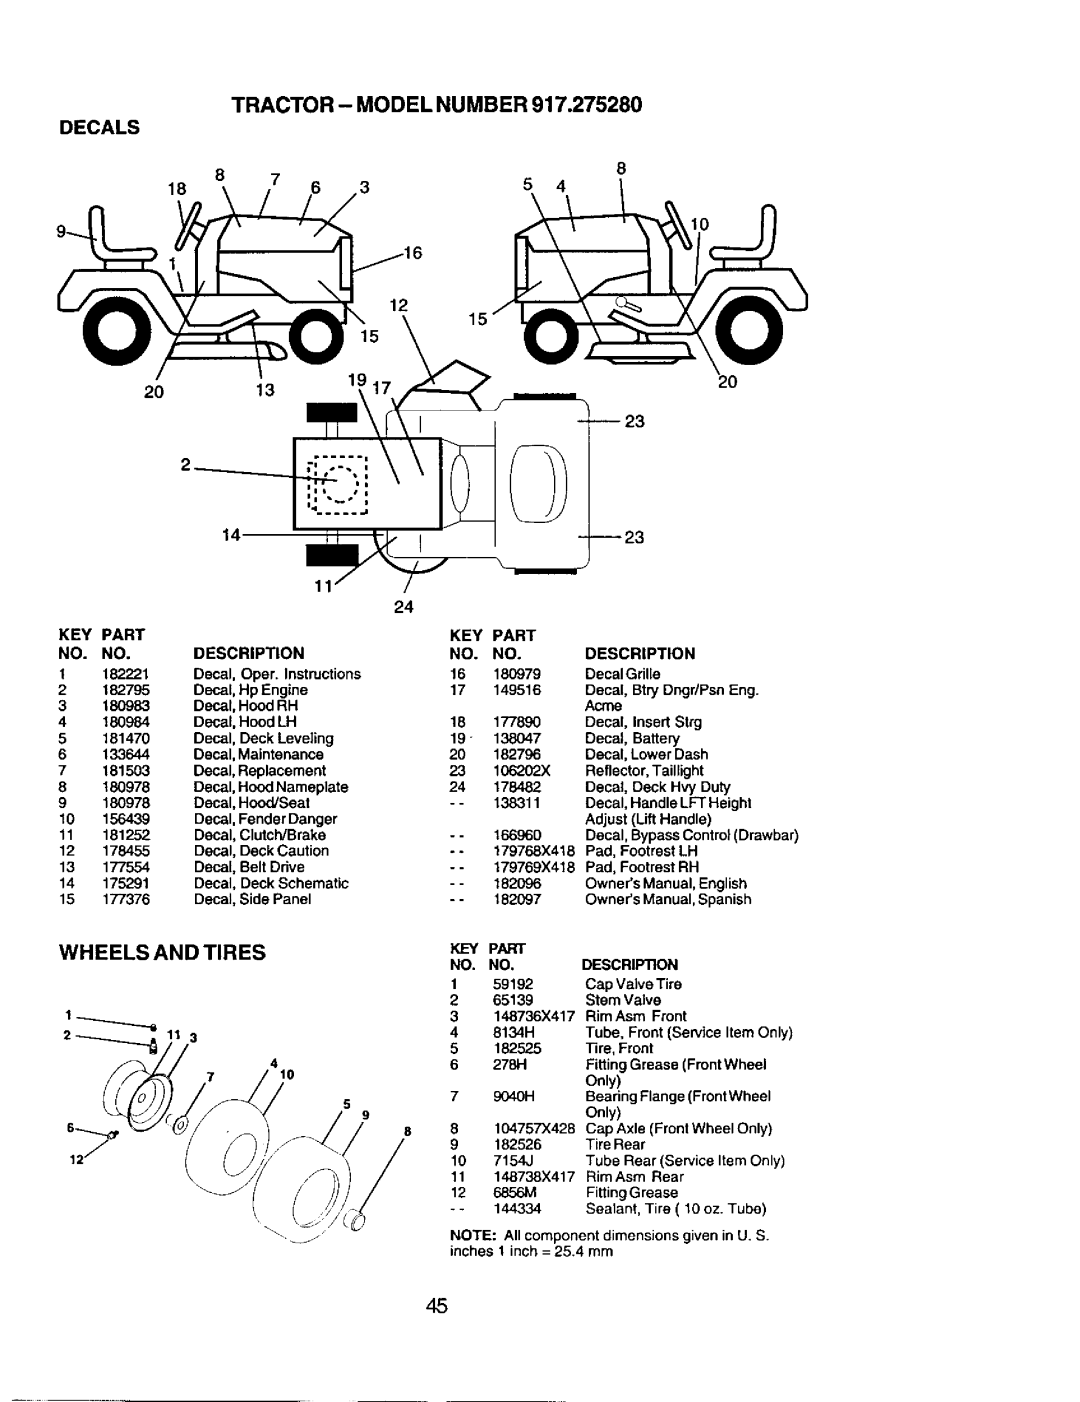 Craftsman 917.27528 owner manual Tractor Model Number Decals, Wheels and Tires, 2O13 